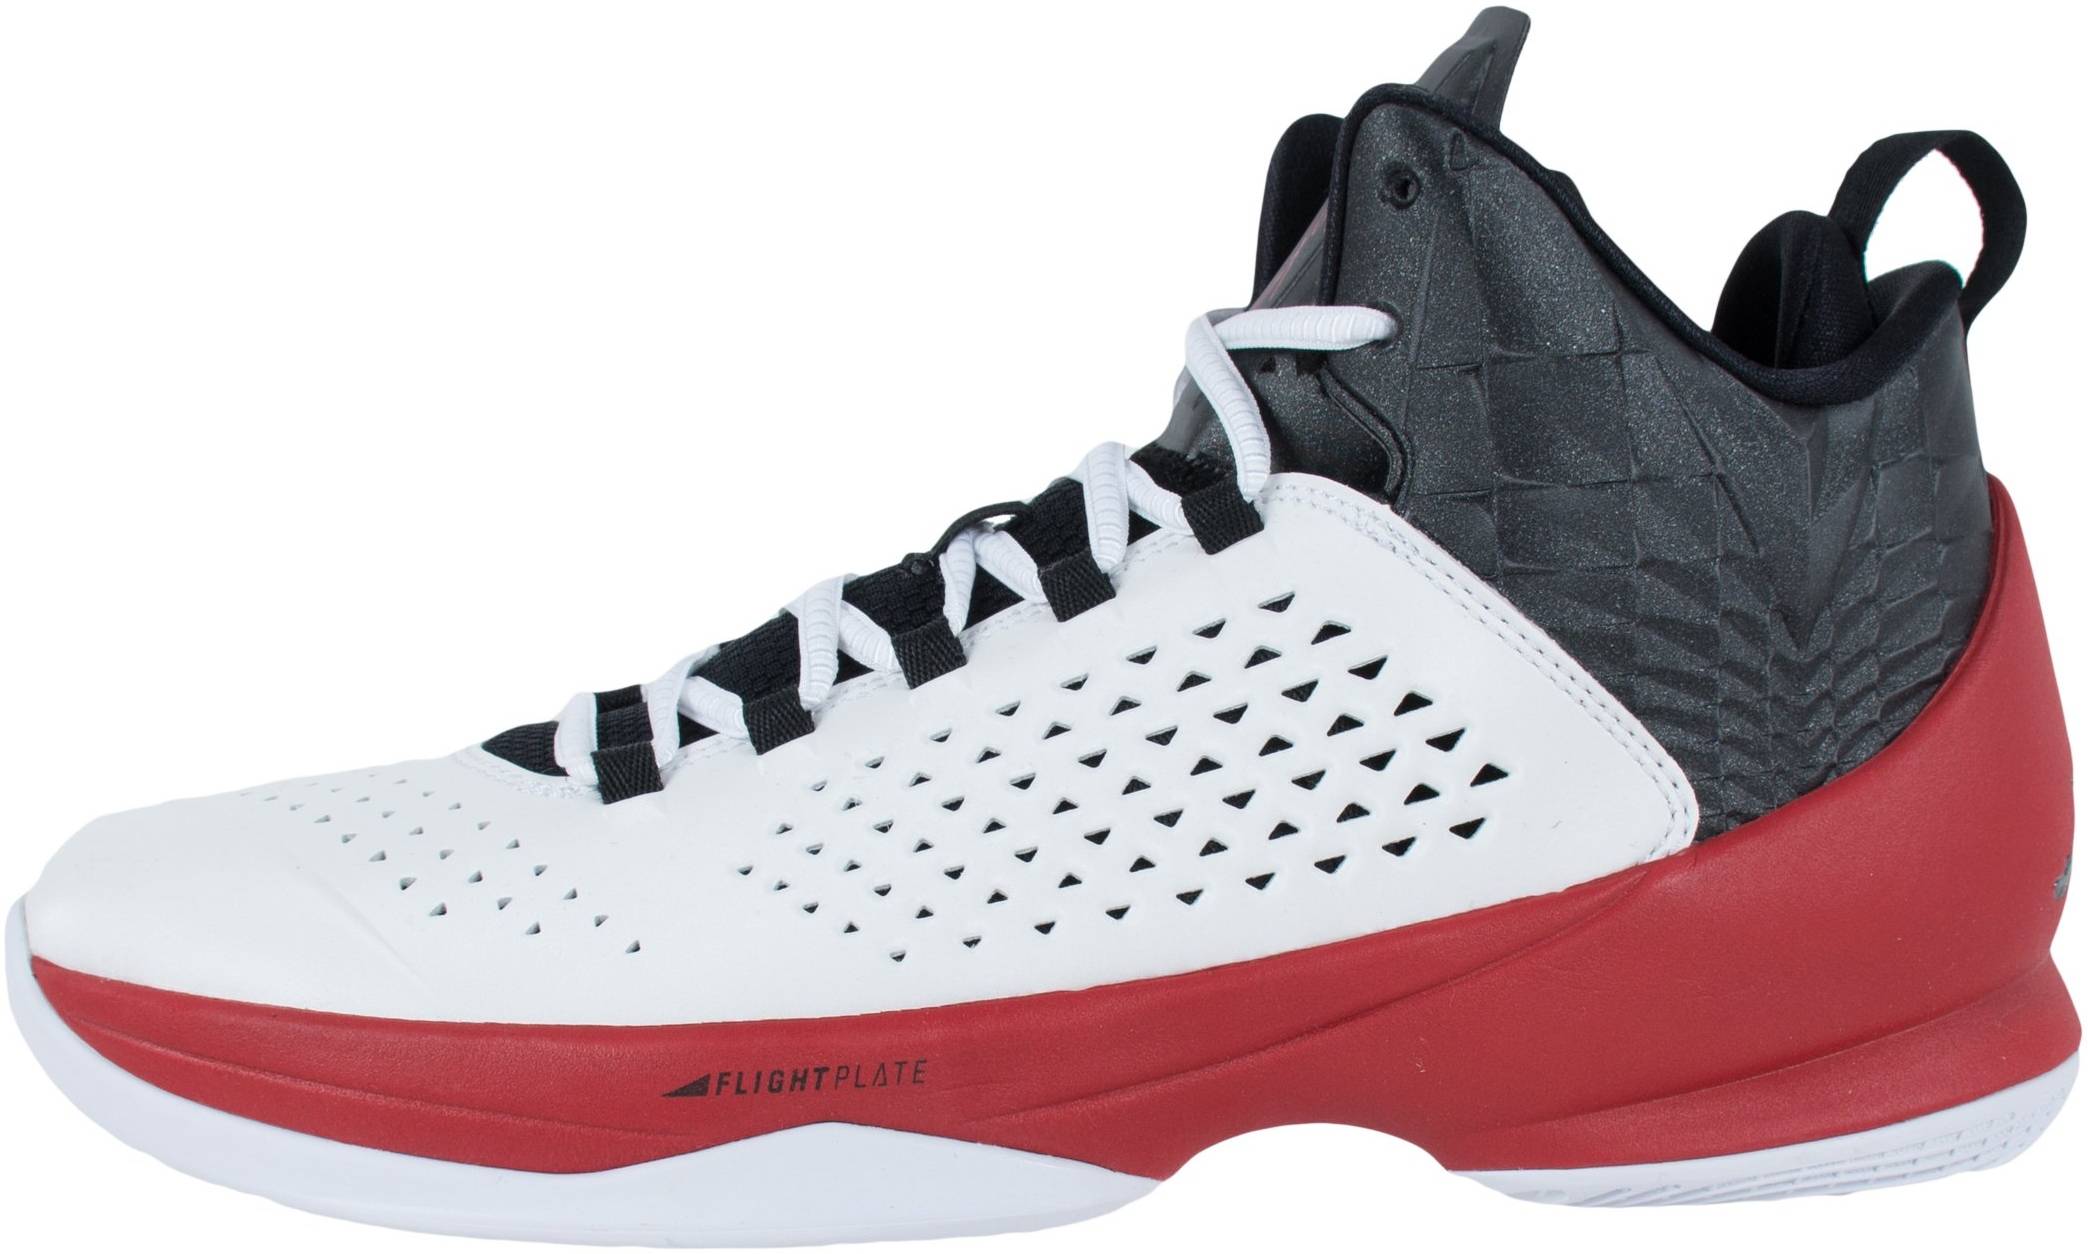 Only $144 + Review of Jordan Melo M11 